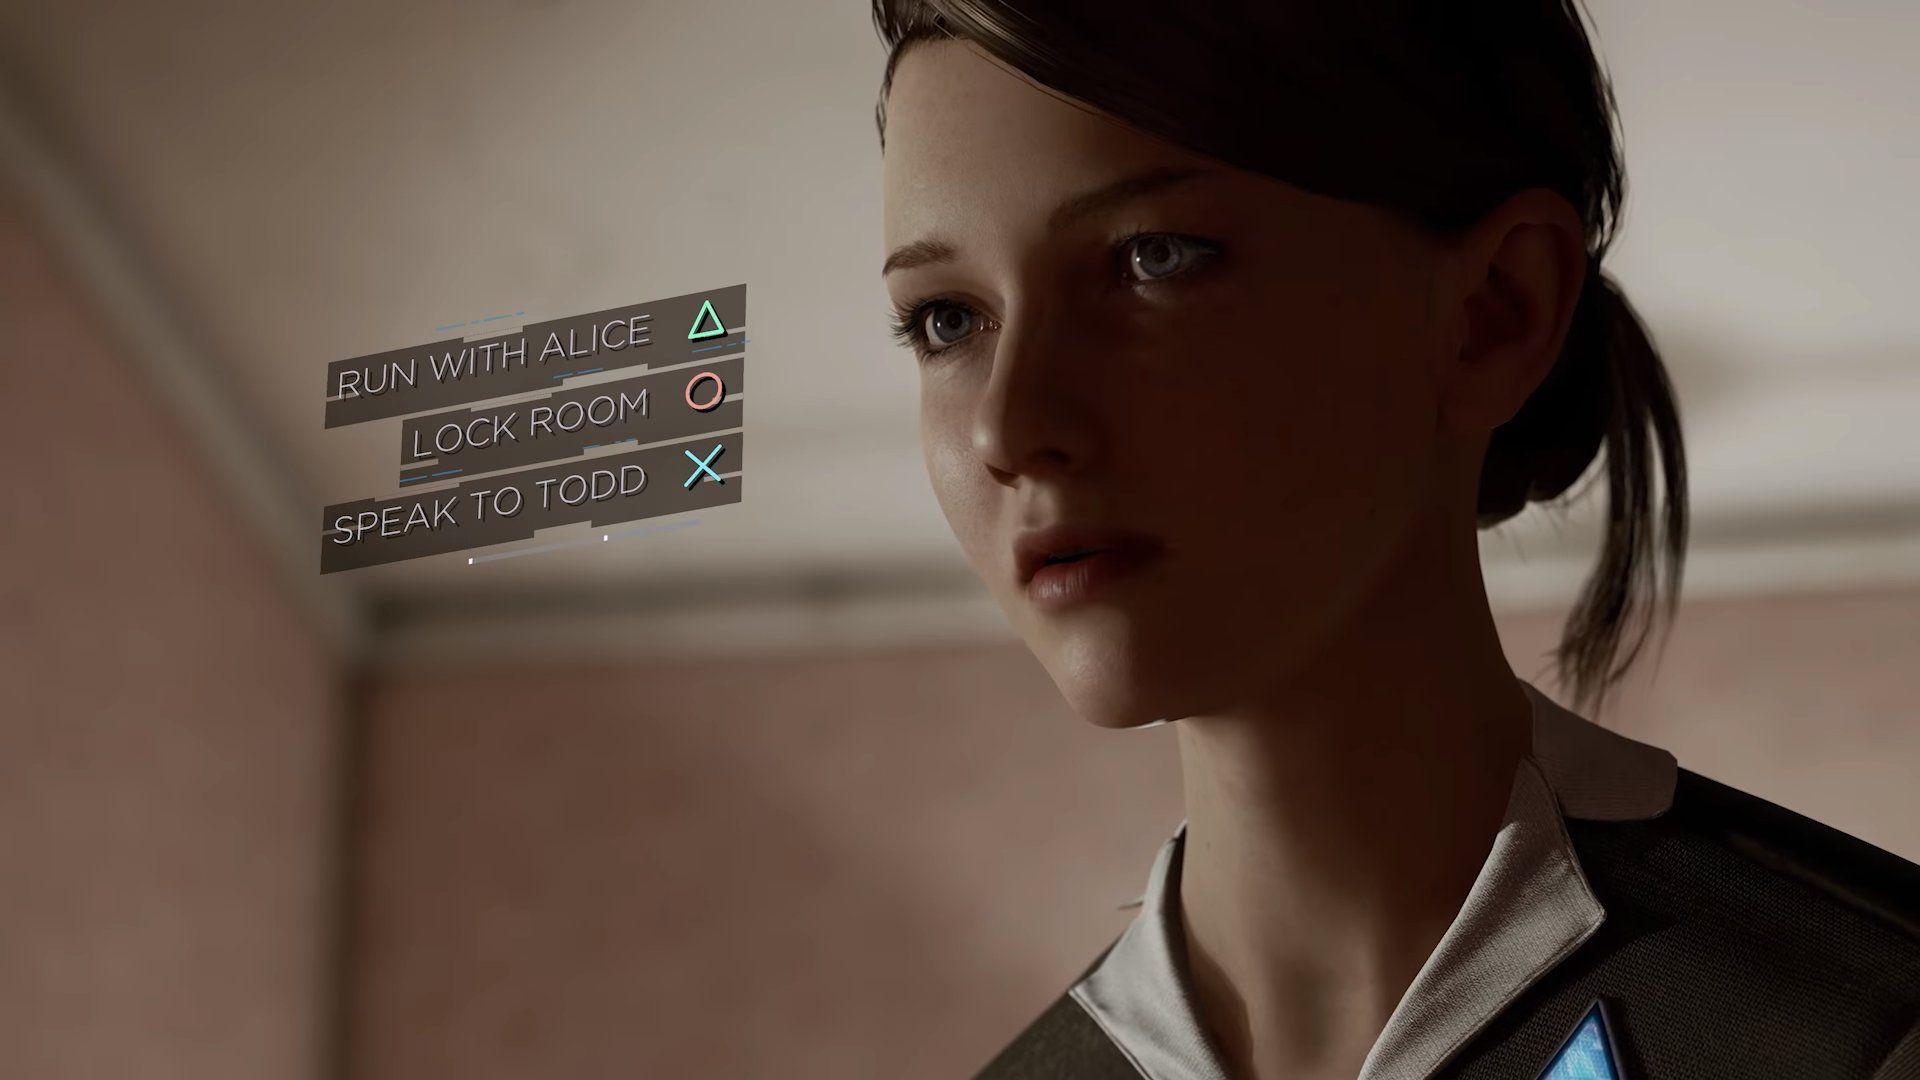 UK MPs and Campaigners Call Detroit: Become Human 'Repulsive'